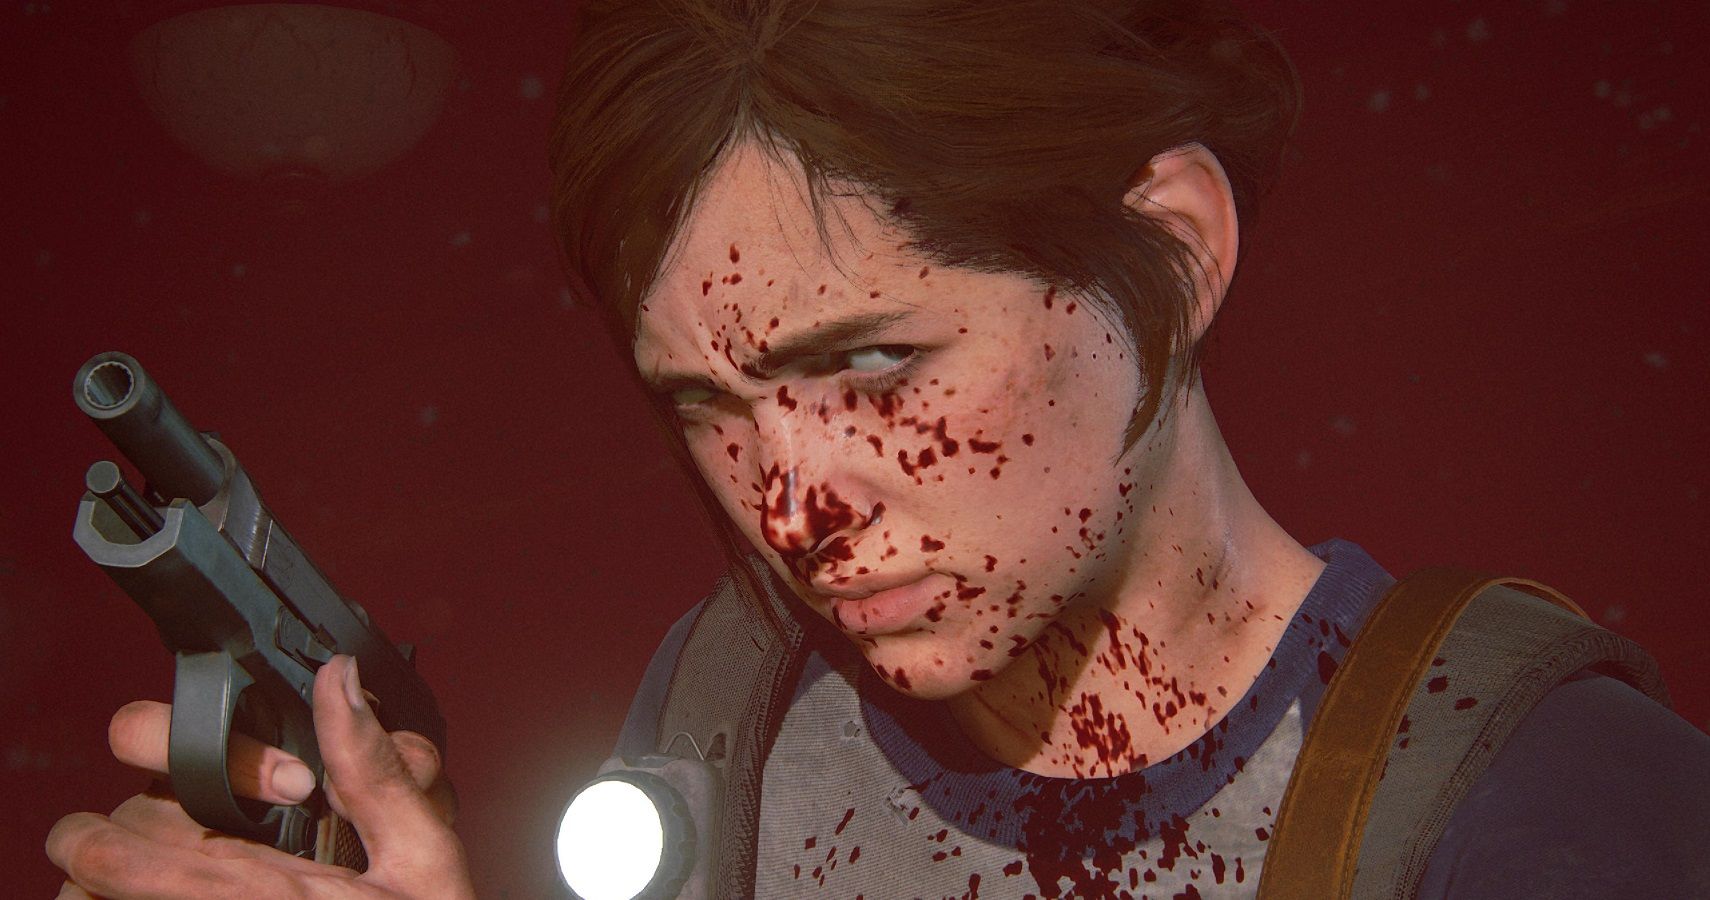 Ellie splattered with blood in The Last of Us 2